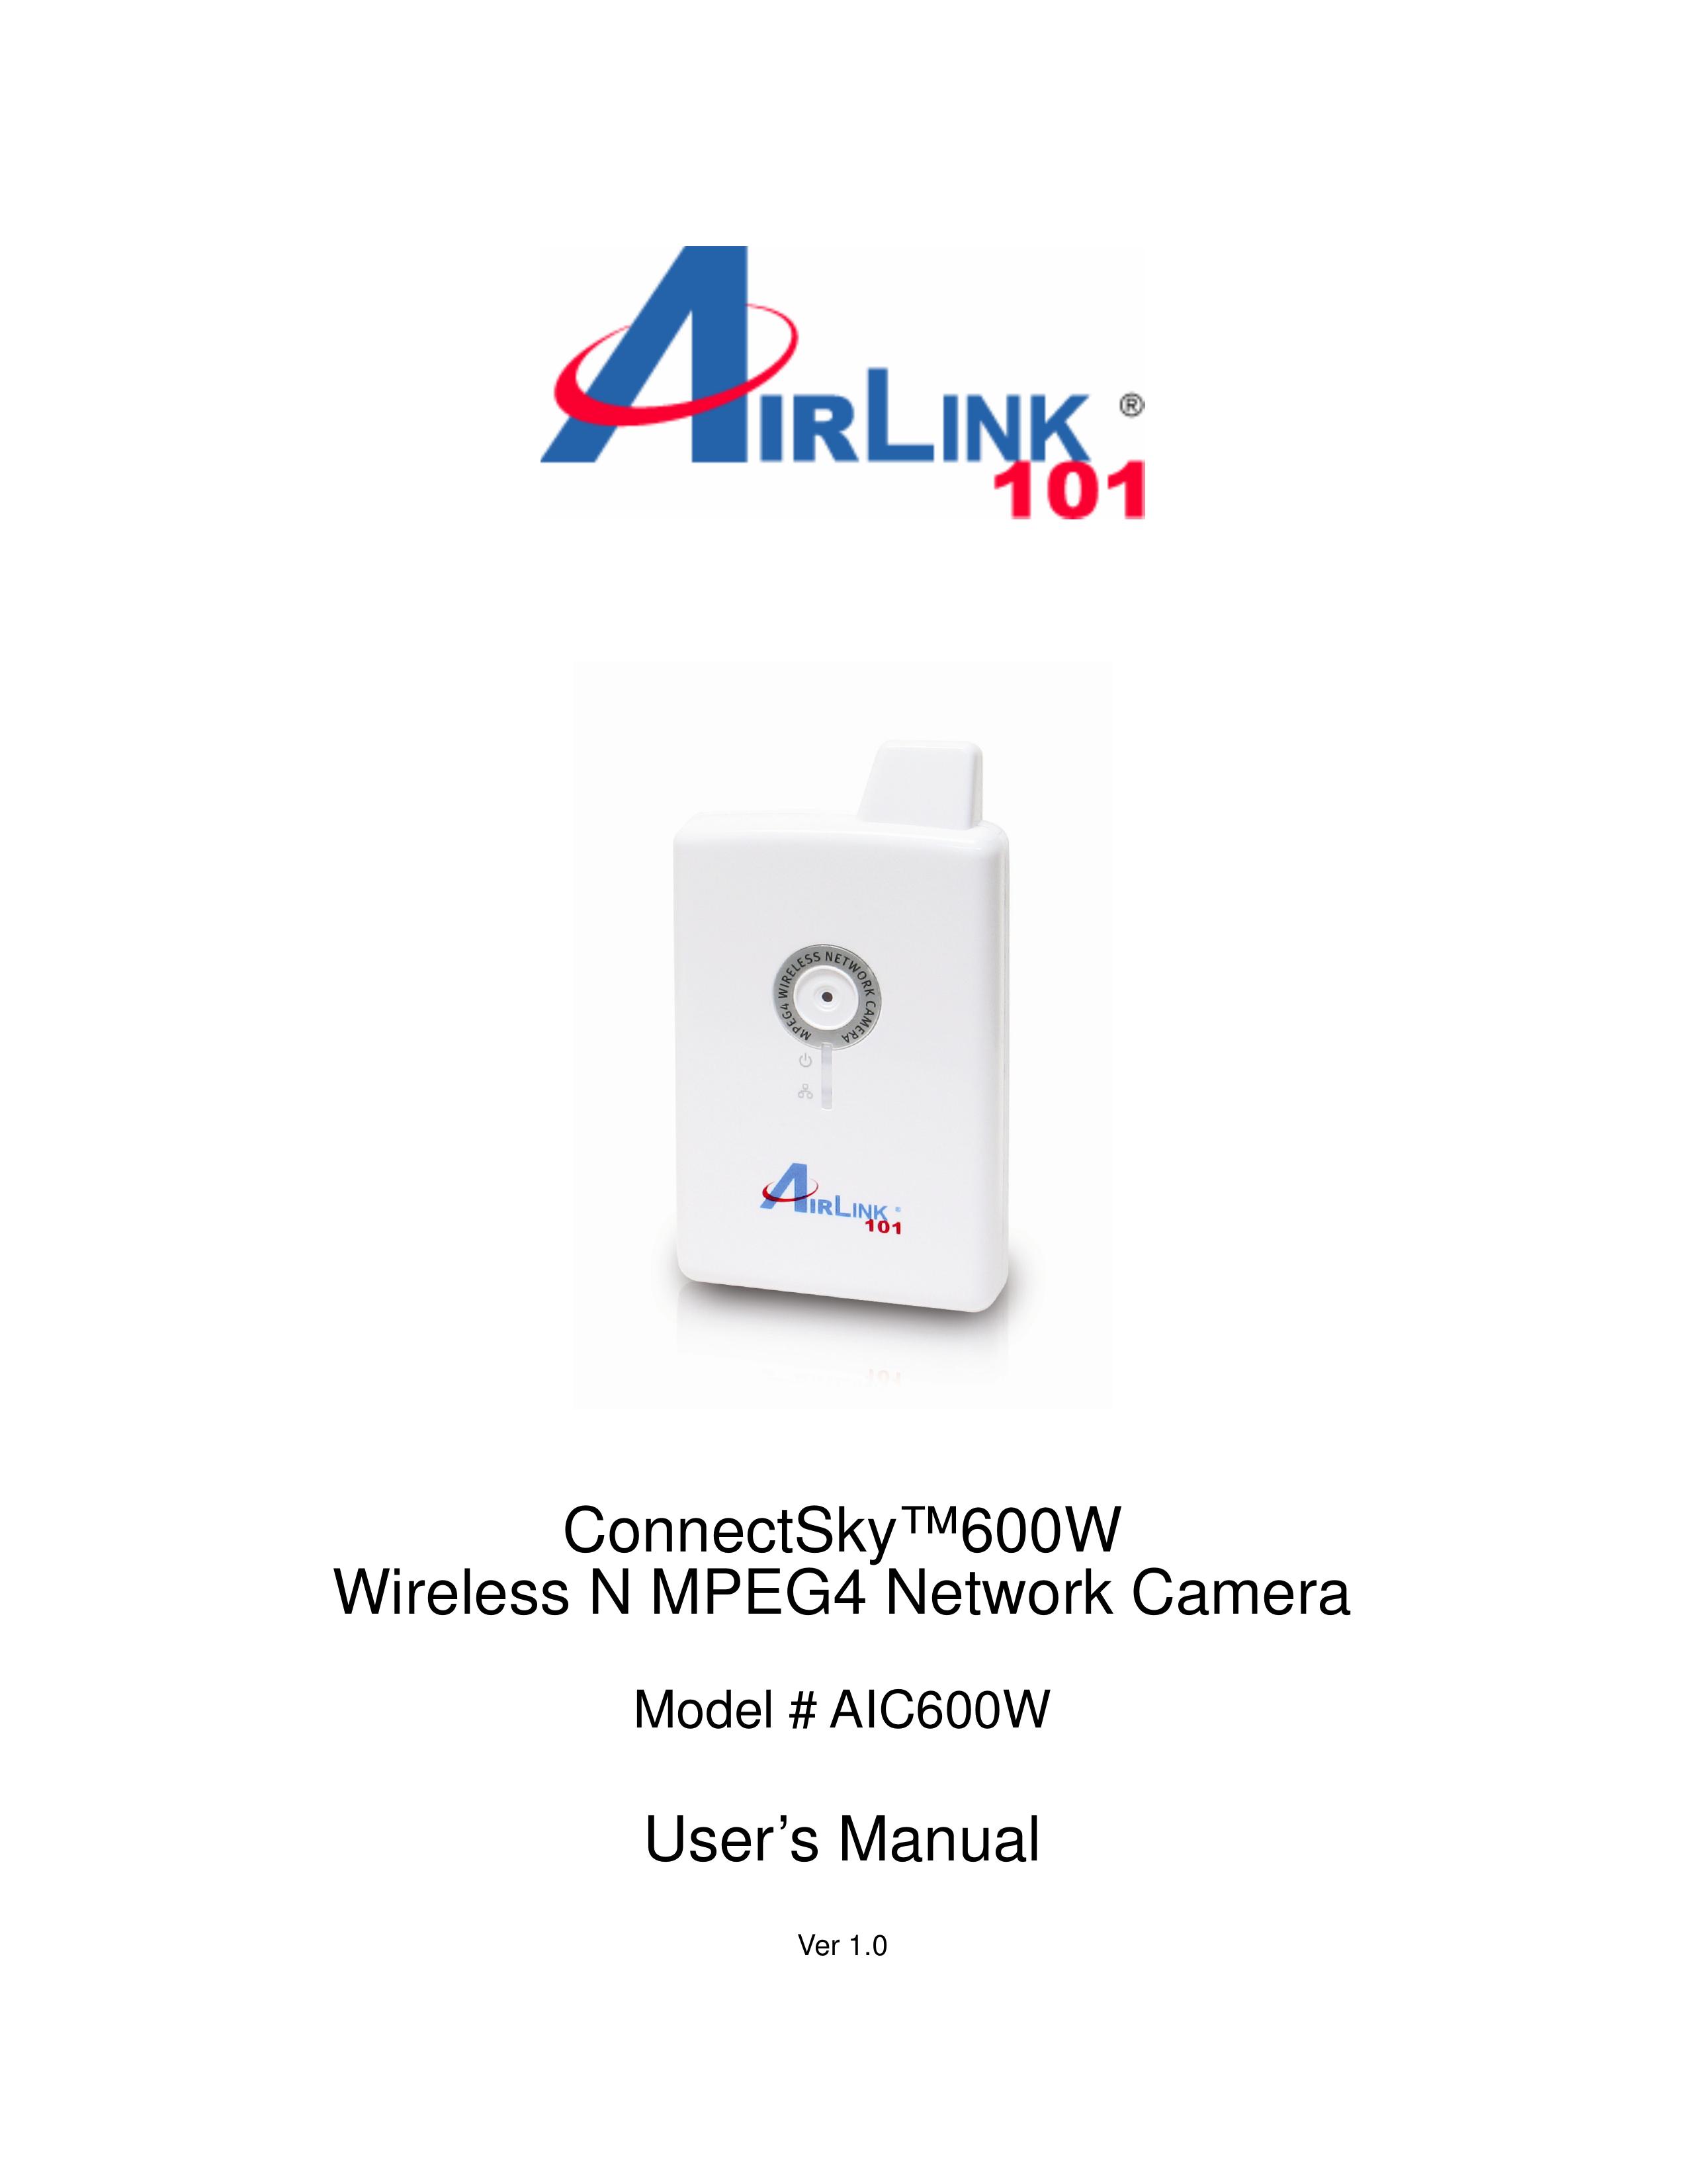 Airlink101 AIC600W Security Camera User Manual